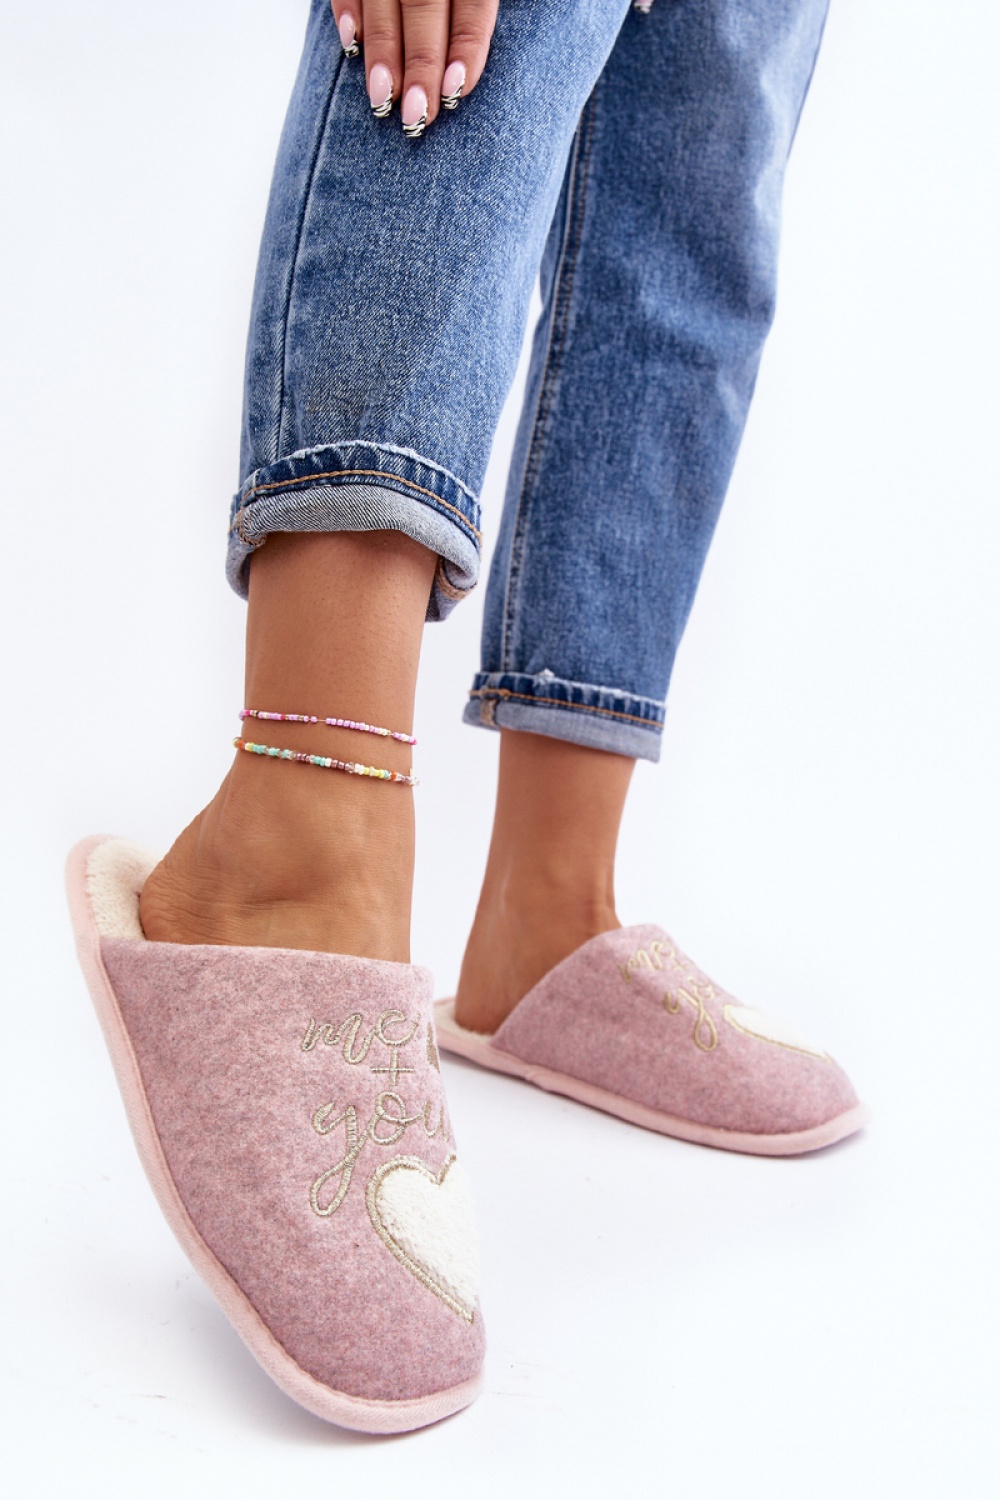  Slippers model 189104 Step in style  pink